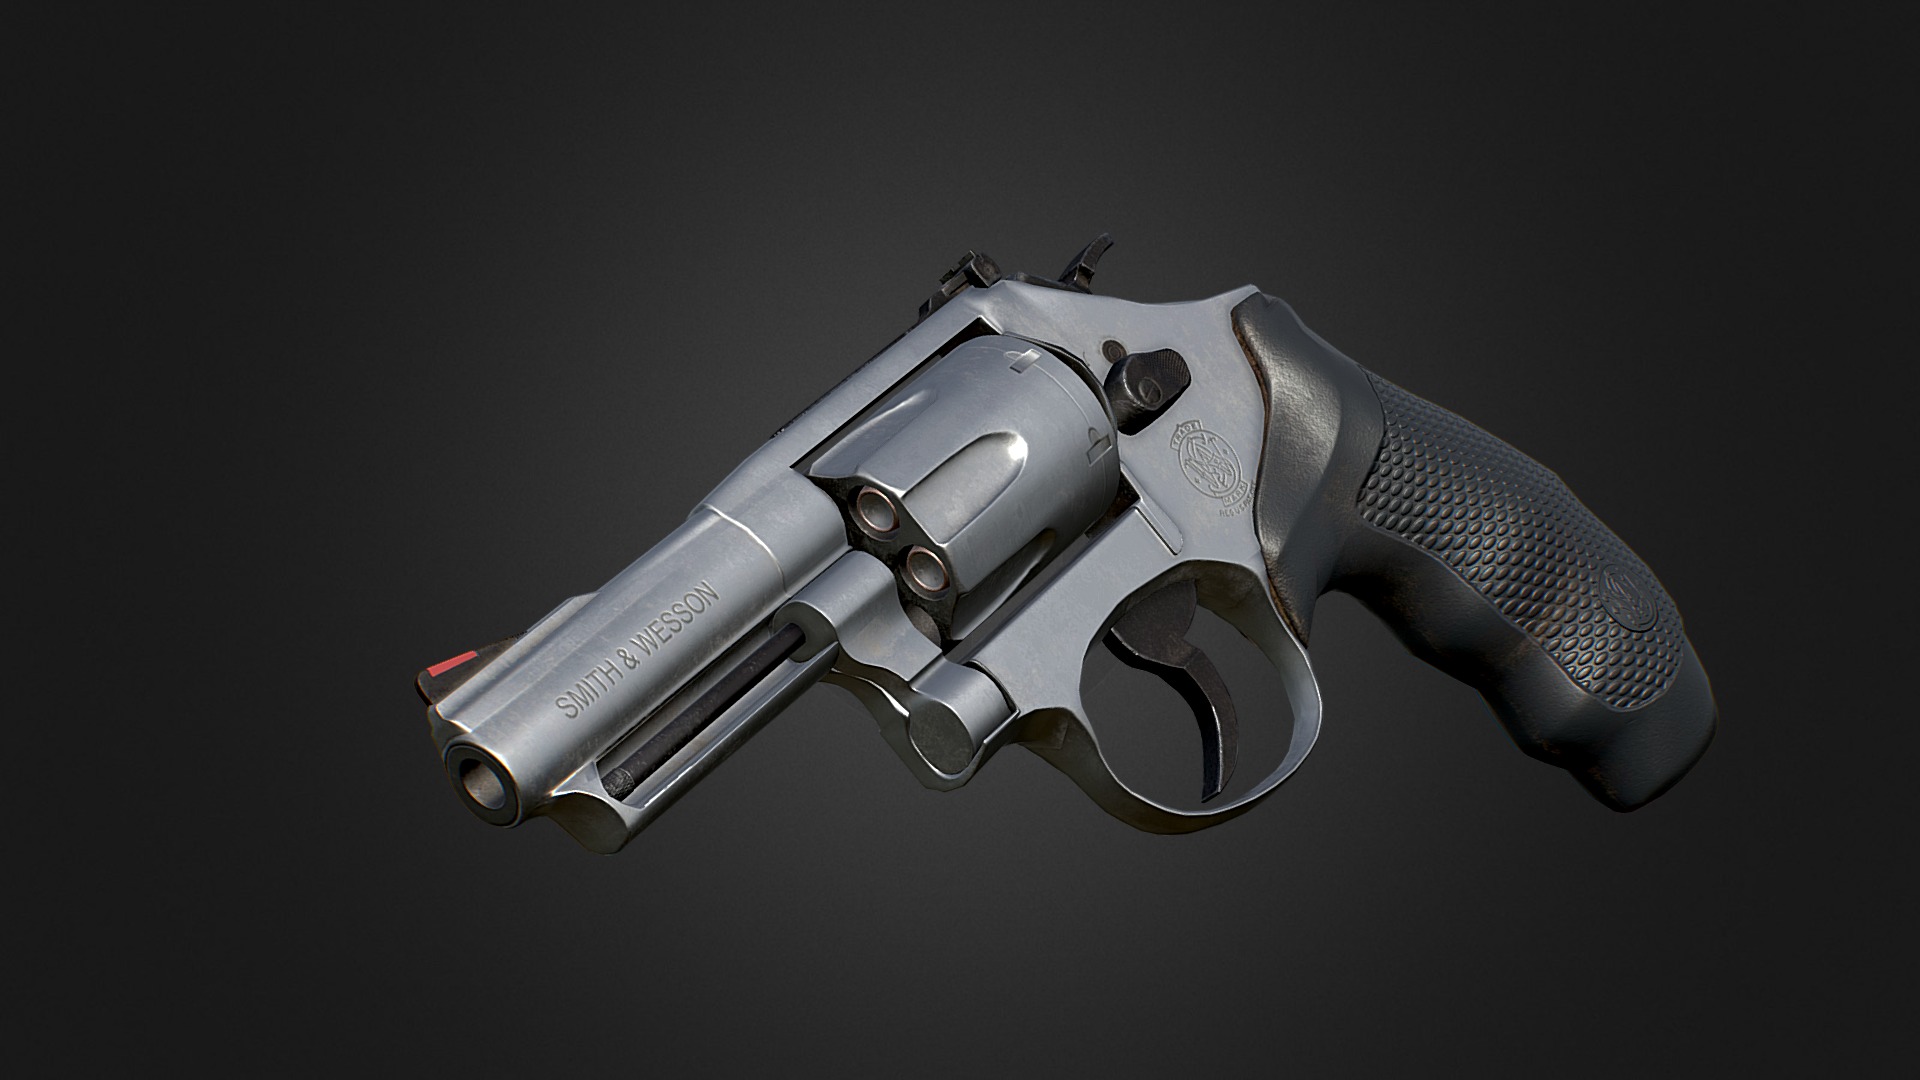 Here's my latest project, a Smith &amp; Wesson 66-8 .357 Revolver. This has a good amount of parts to it, so to have everything bake out right I had to bake by mesh name. I learned two things - that baking by mesh name is case sensitive, and trying to use an .fbx before it's fully exported just doesn't work. It corrupts your exported file. Just so you know.

With the textures, I used a combination of materials and masks to mimic dirt, grime, and soot from repeated use. I had to make about 7 alphas for all the height details.

I had to adjust some materials so it'd read better as metal instead of stone, as well as adjusting the damage information and swapping out some normals that I wasn't satisfied with. Time to call this model finished for now. I learned quite a bit from making this thing, time to apply what I know now to something new 3d model